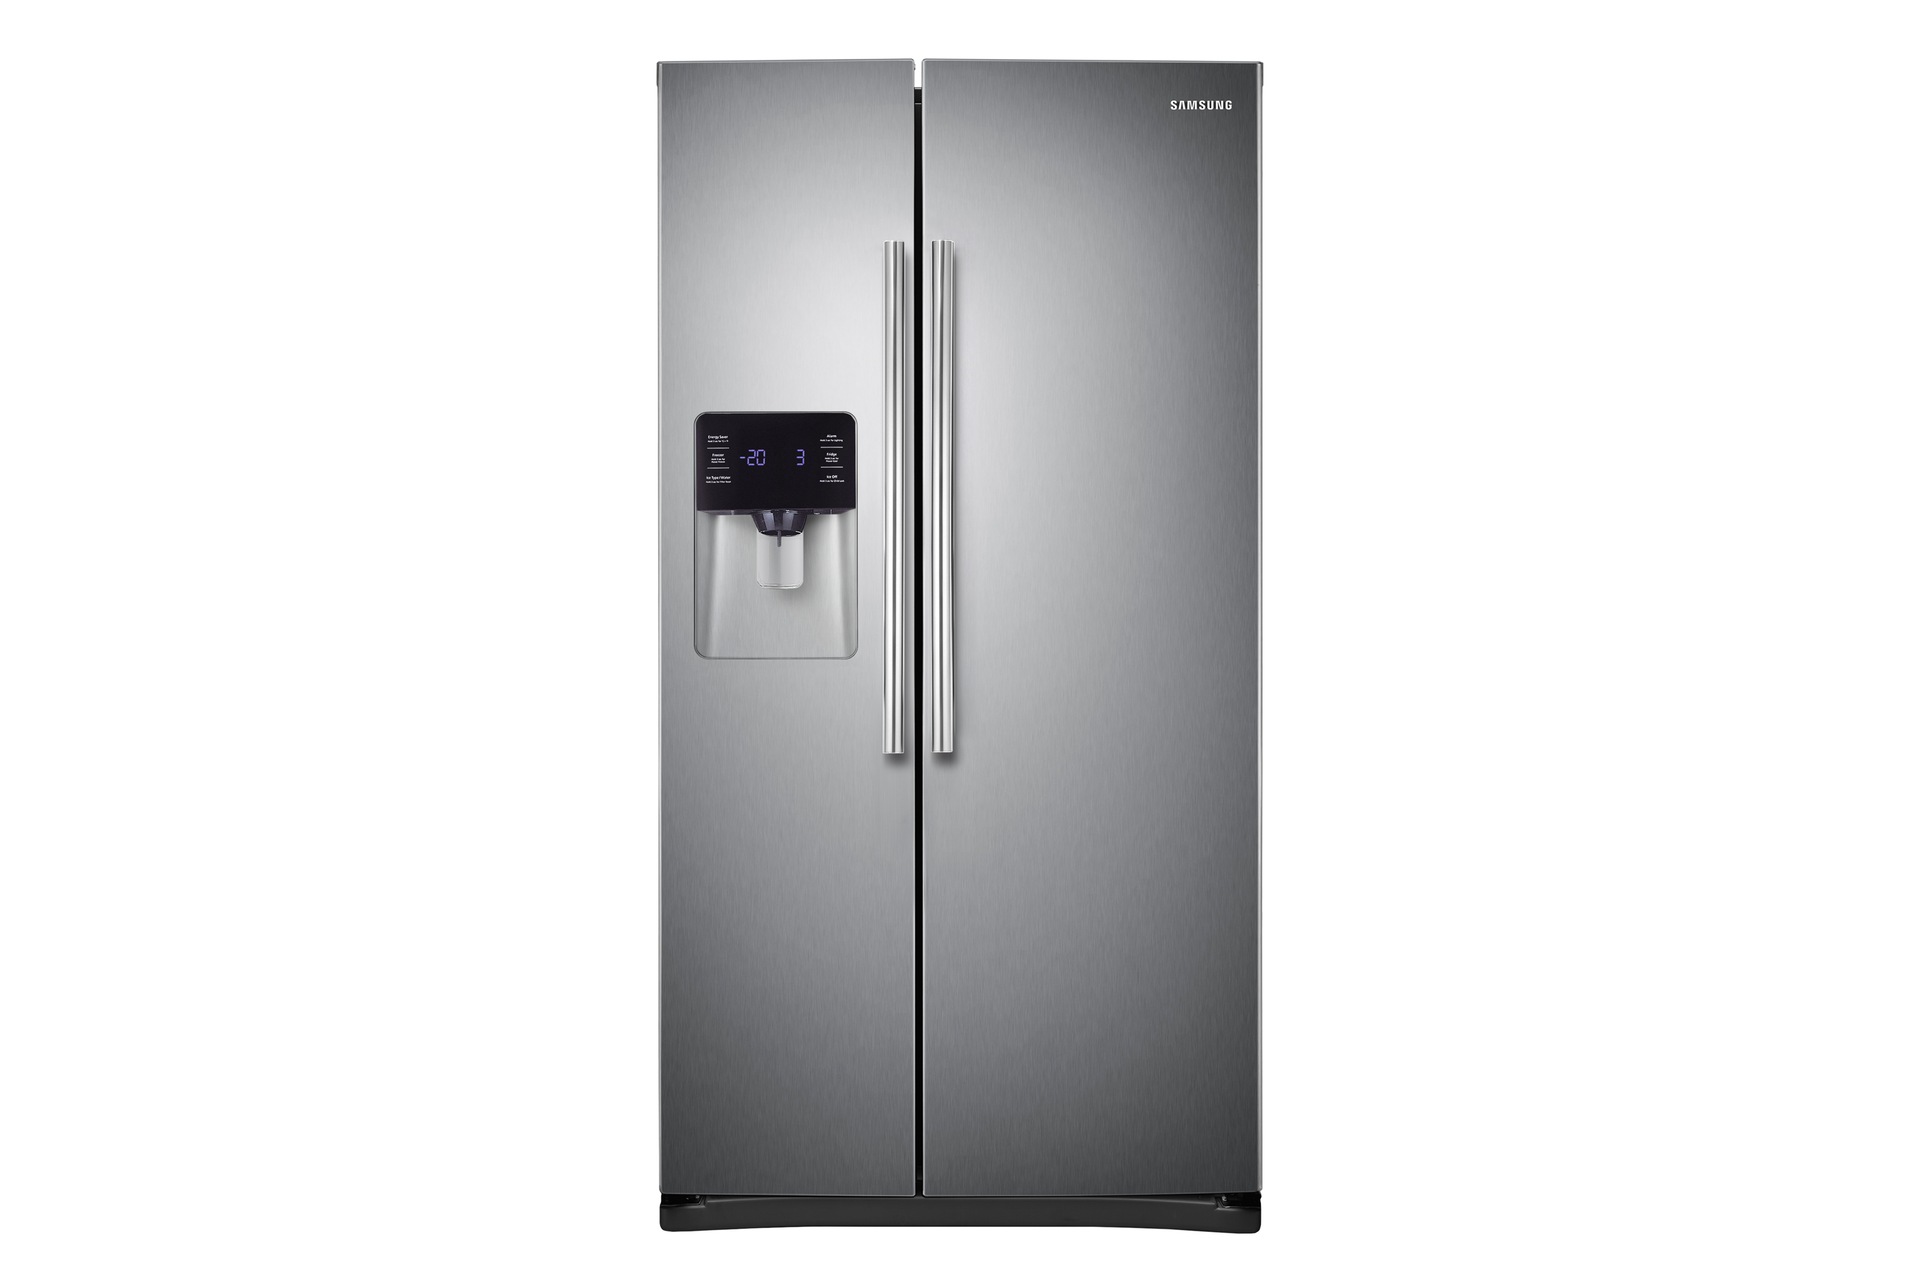 HM10 SBS with Twin Cooling, 24.5 cu. ft. | RS25H5111SR/AA | Samsung ...